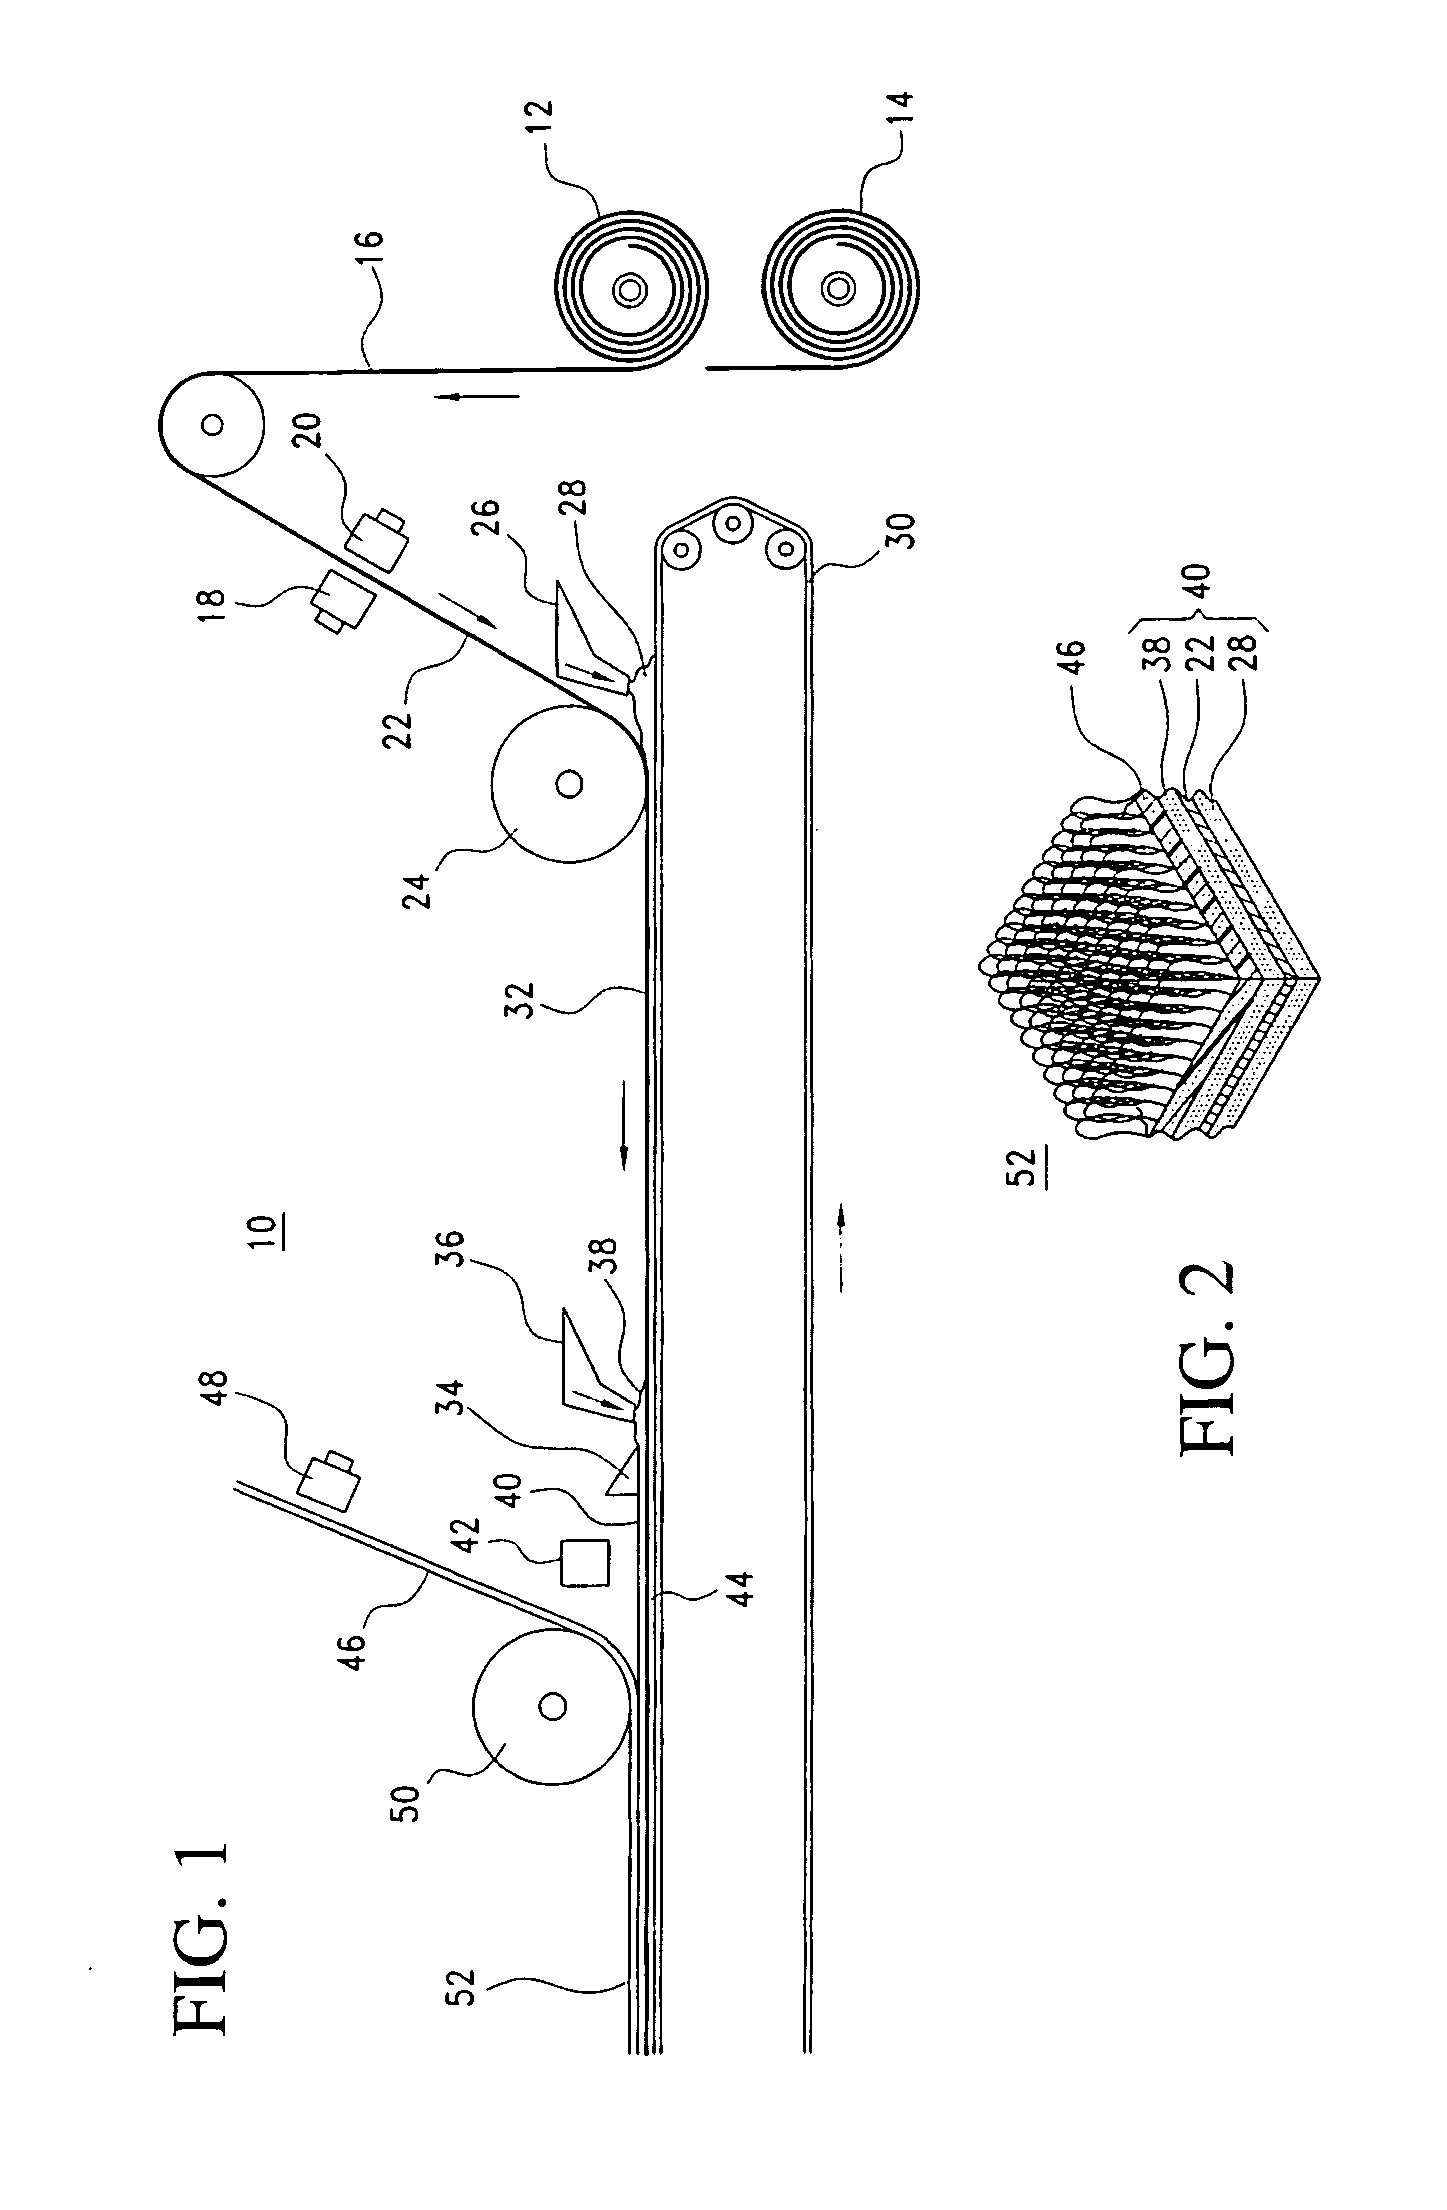 Method and Apparatus for Making Carpet